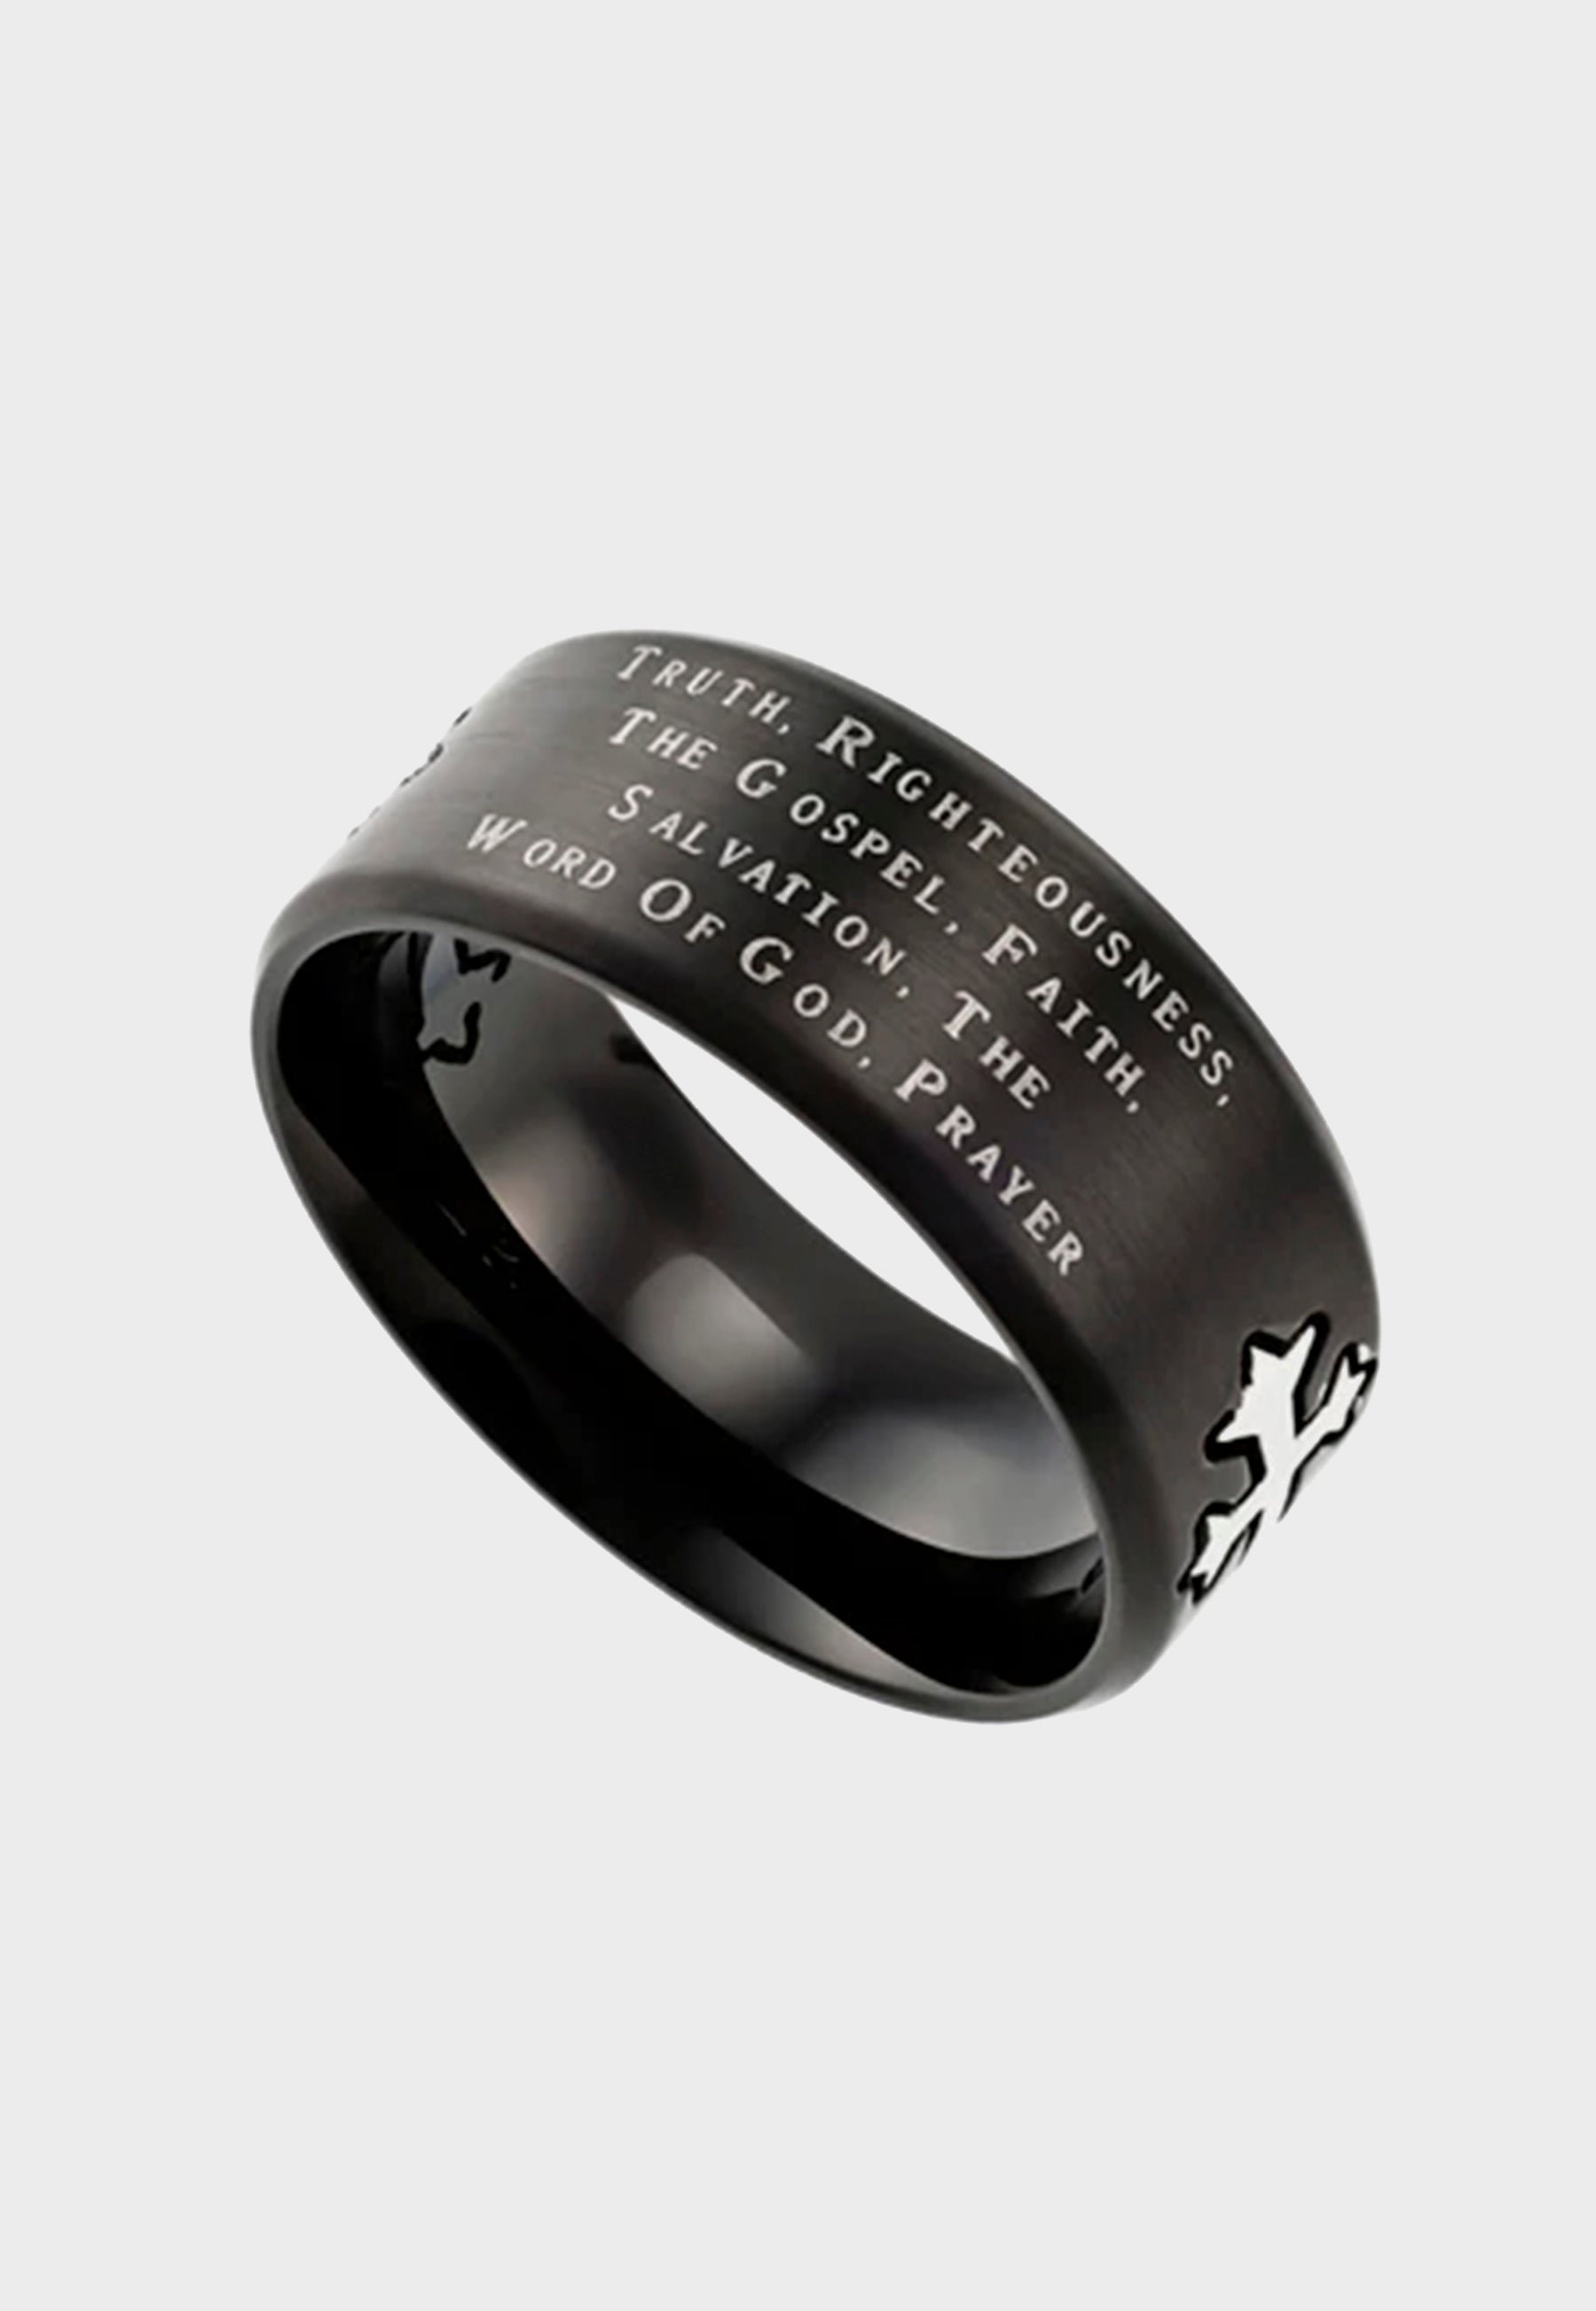 Mens Christian ring with cross